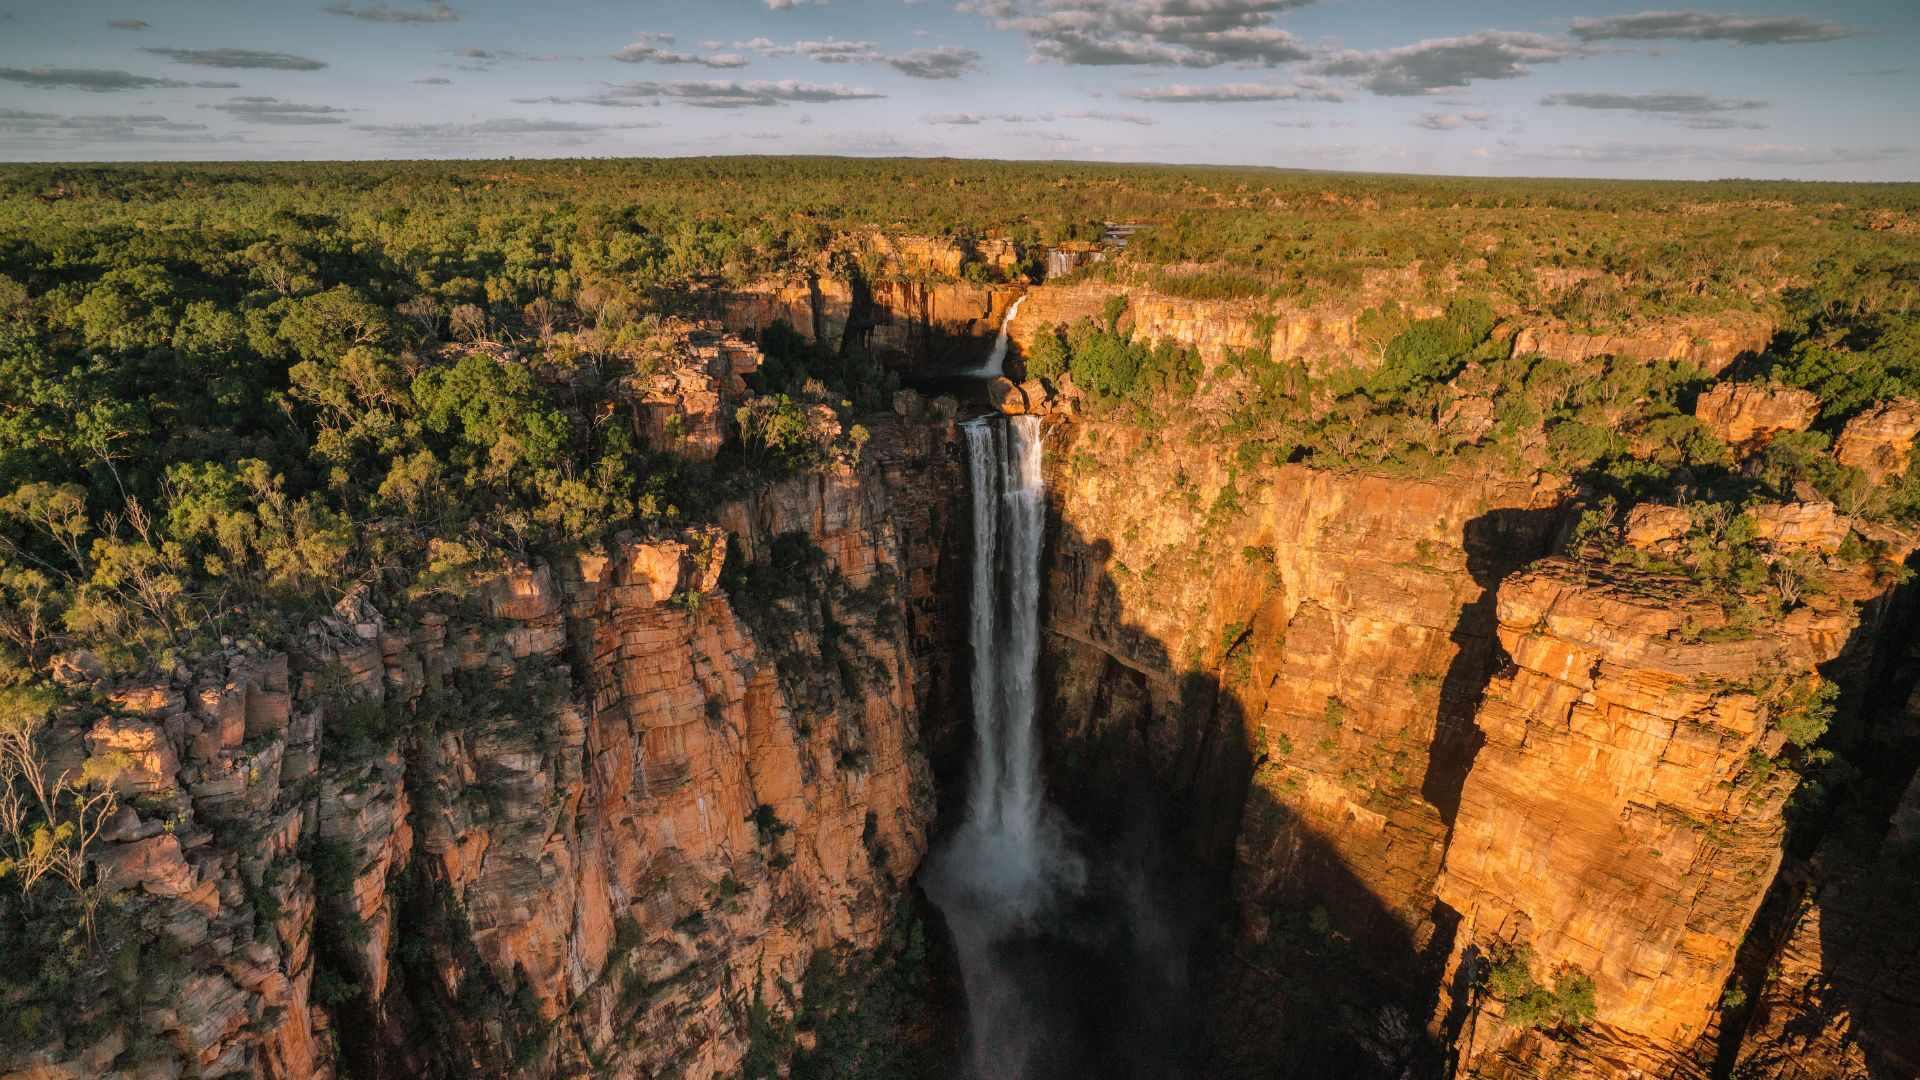 Score Flights to the NT From as Low as $89^ with Jetstar